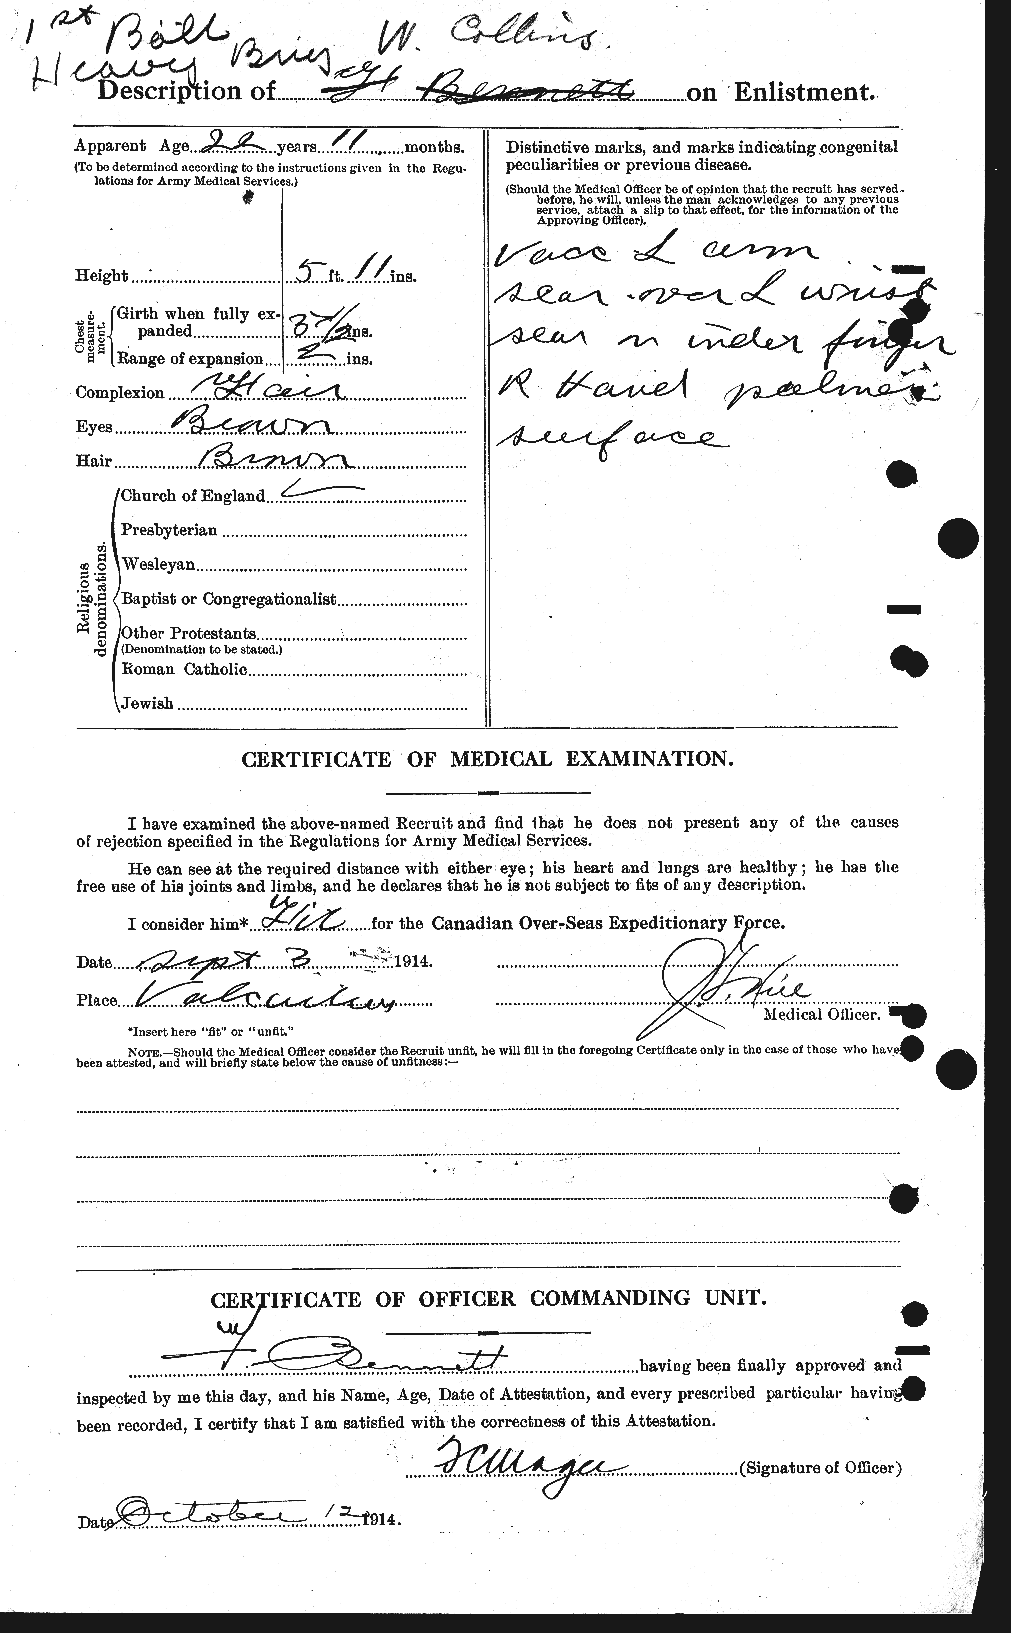 Personnel Records of the First World War - CEF 068834b